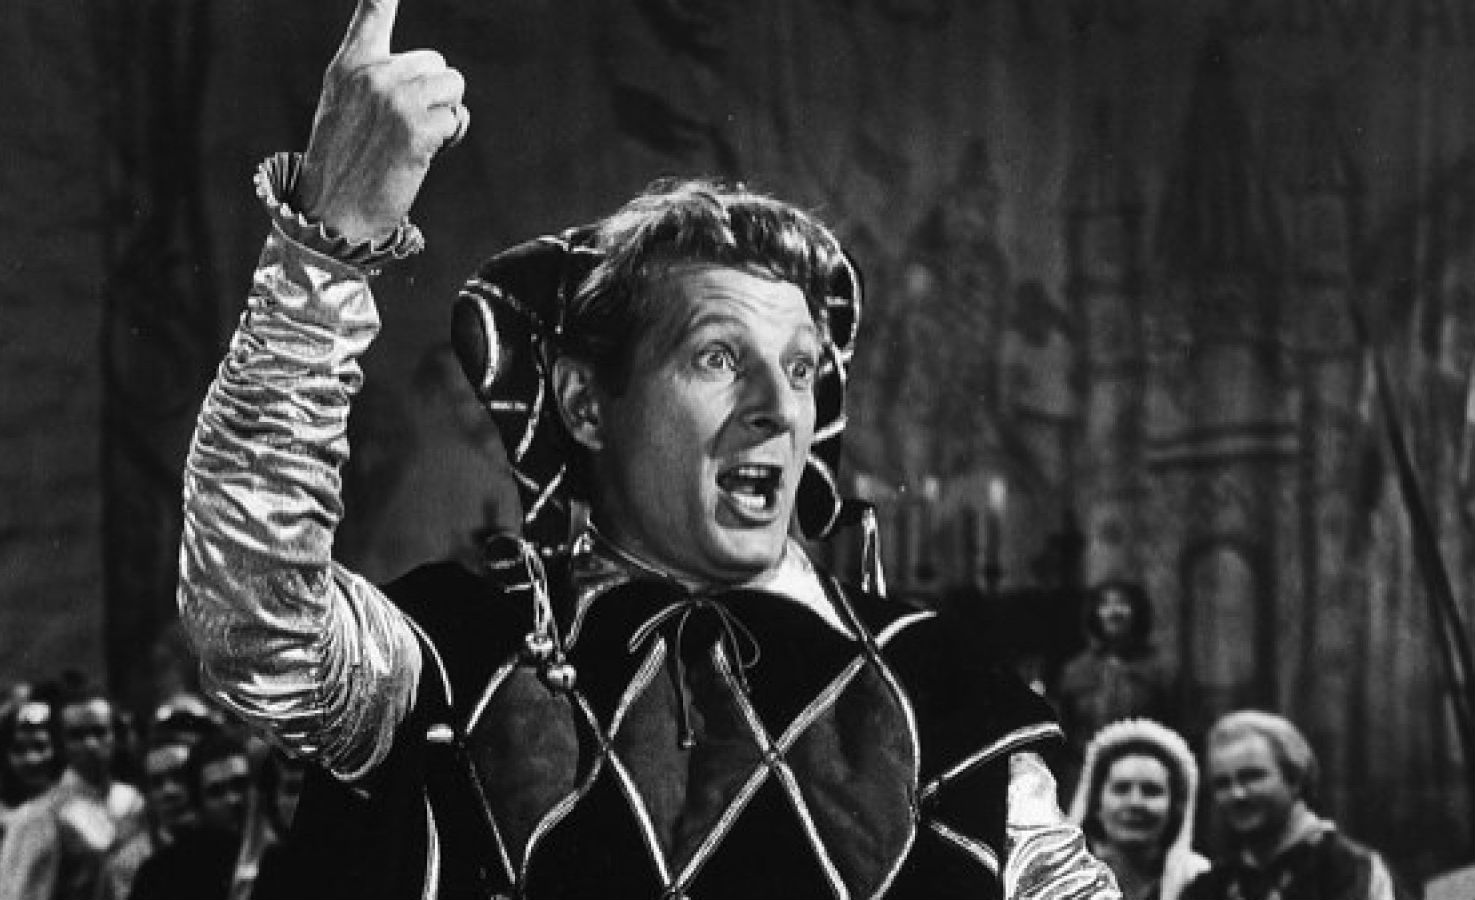 Danny Kaye as the title character in The Court Jester, 1956.
